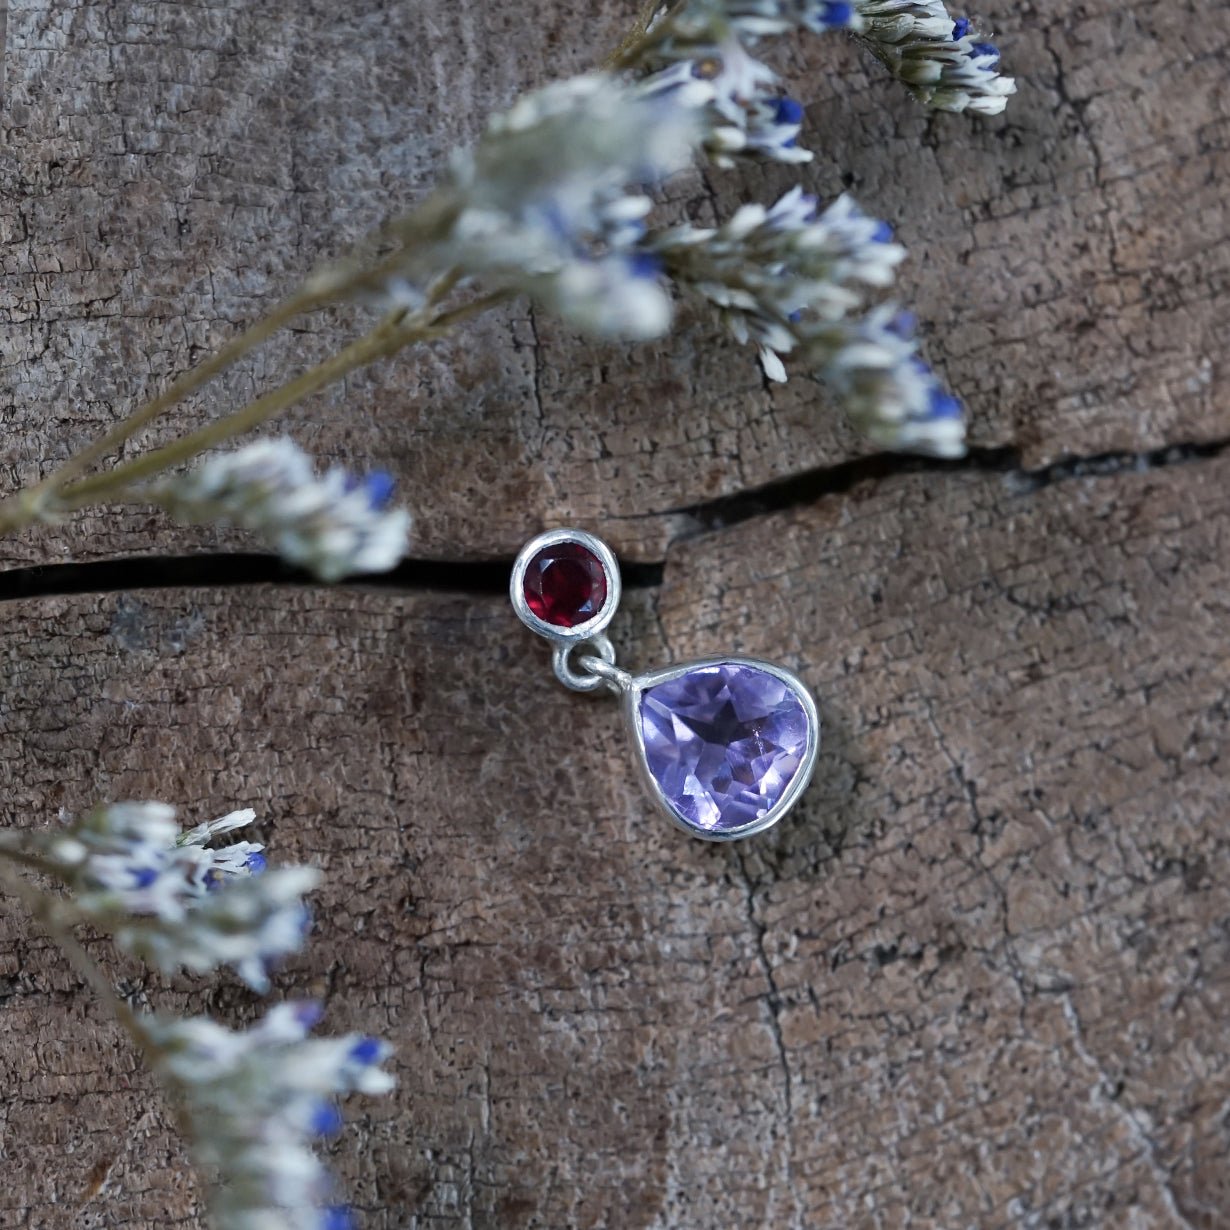 Garnet and Amethyst Dangling Earrings - Gardens of the Sun | Ethical Jewelry